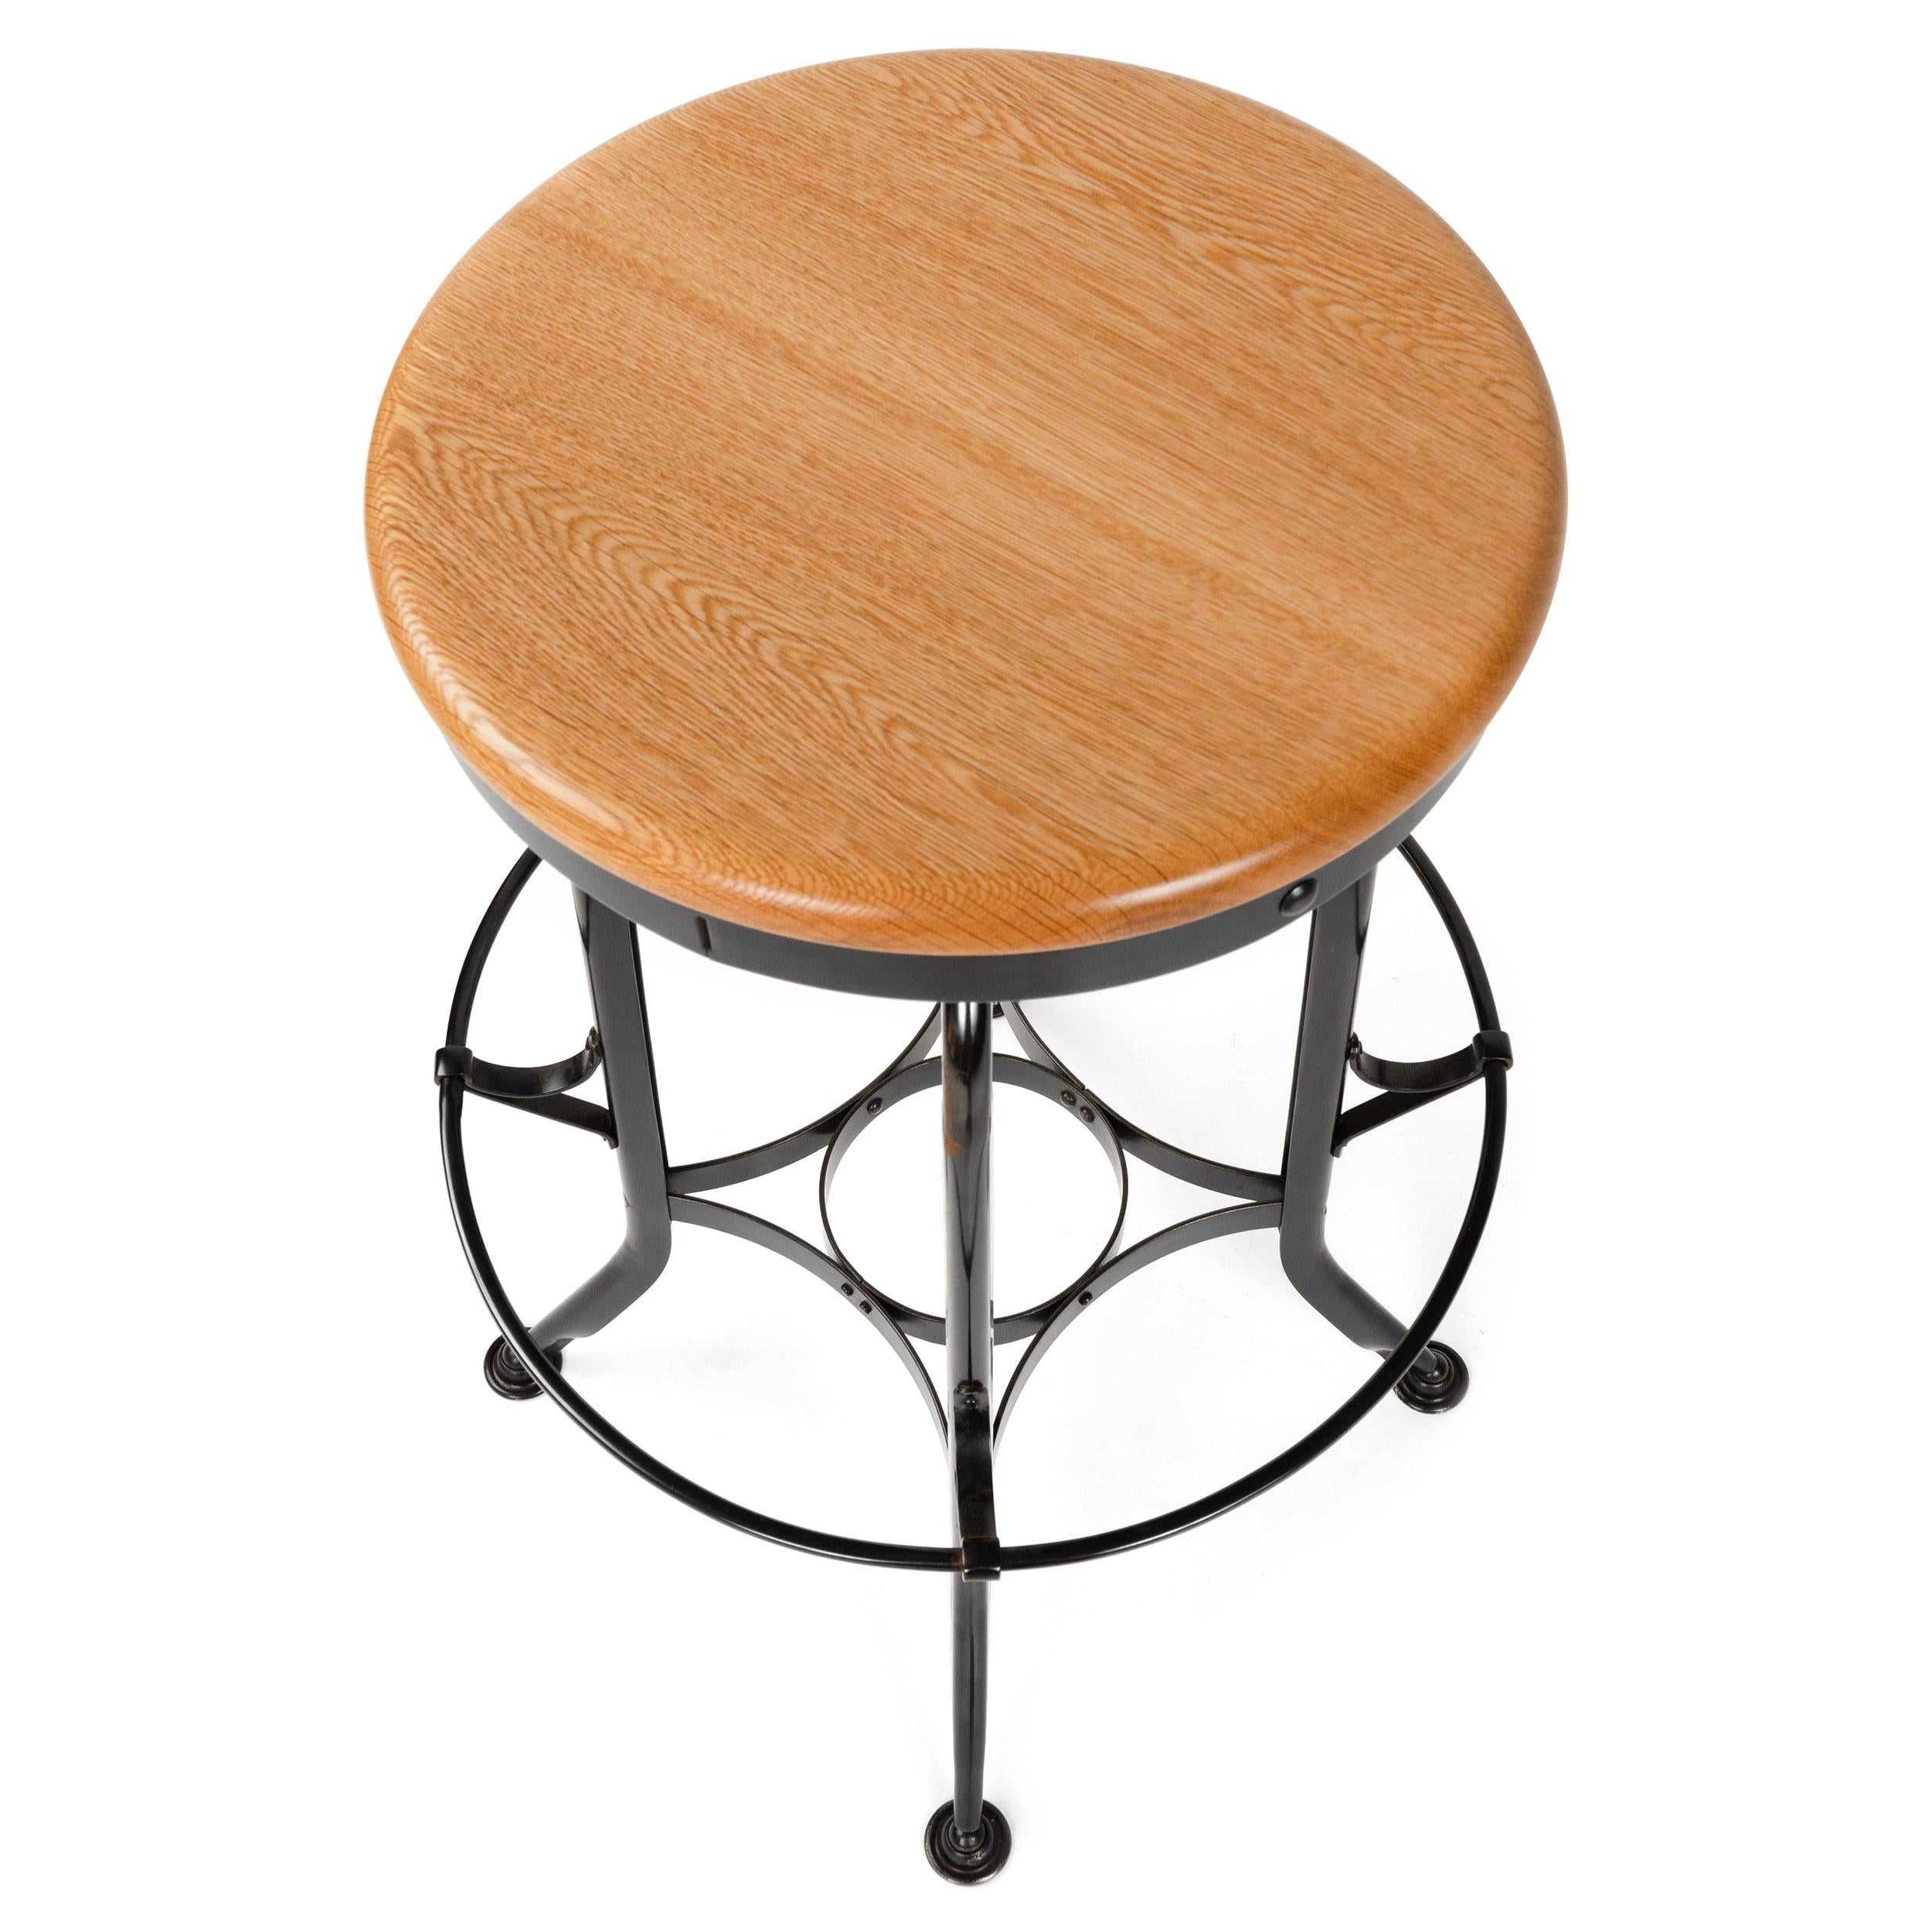 American Adjustable Oak and Steel Stool by Toledo For Sale